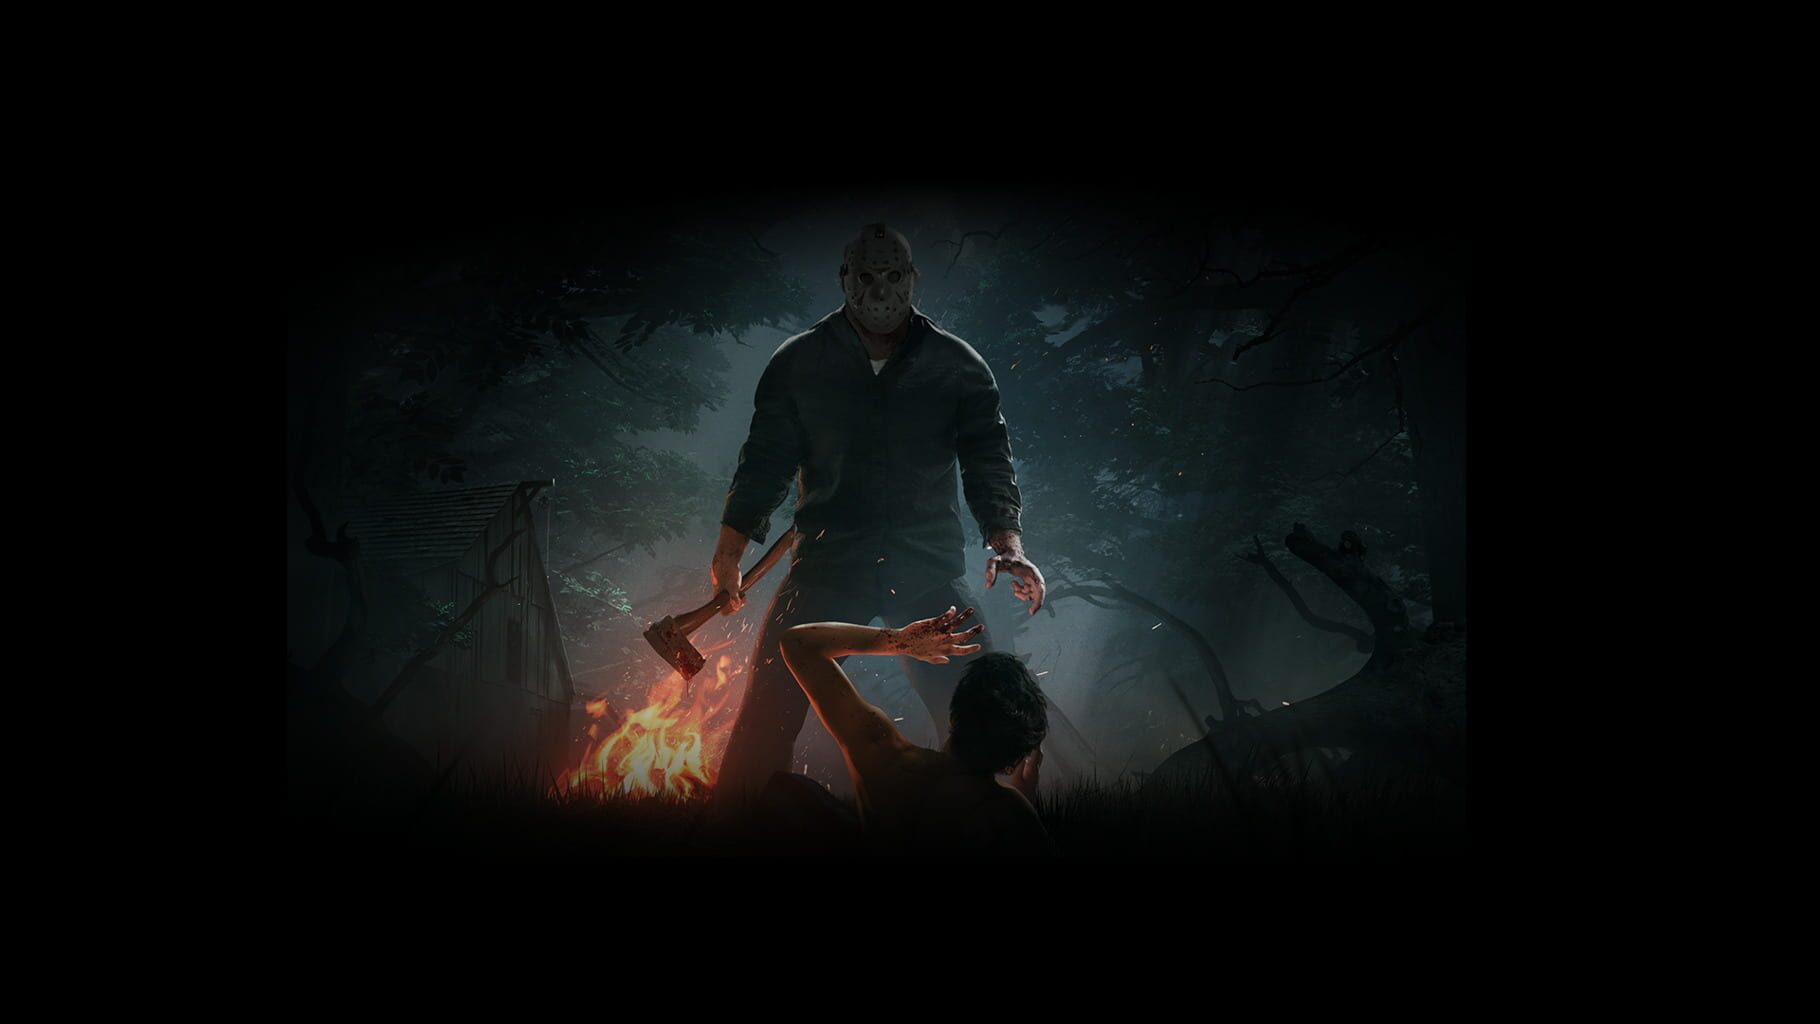 Friday the 13th: The Game artwork